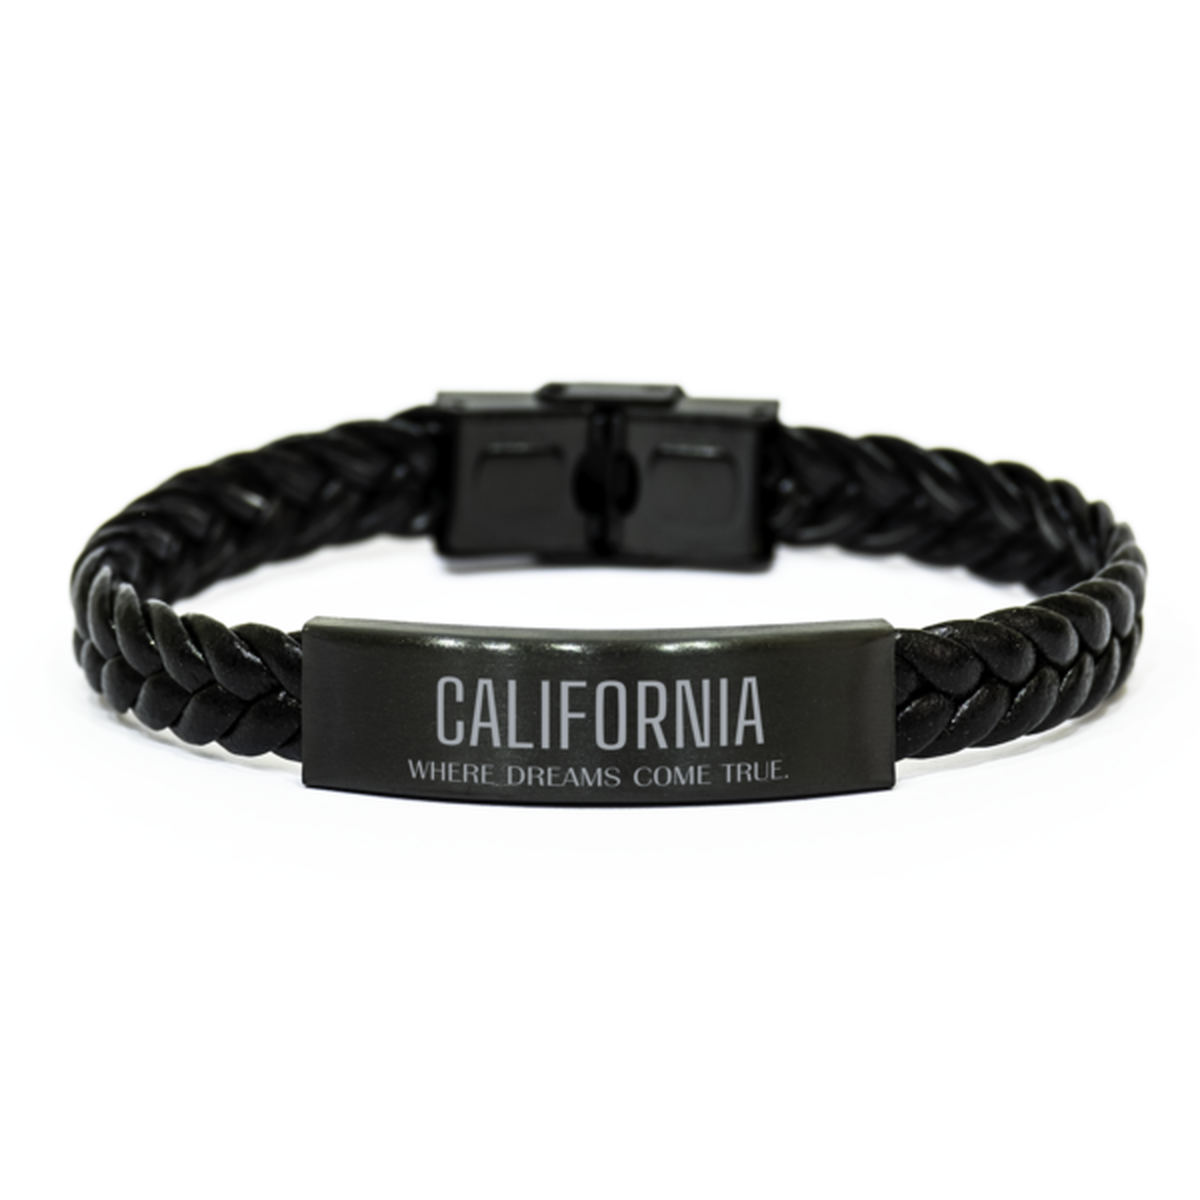 Love California State Braided Leather Bracelet, California Where dreams come true, Birthday Inspirational Gifts For California Men, Women, Friends